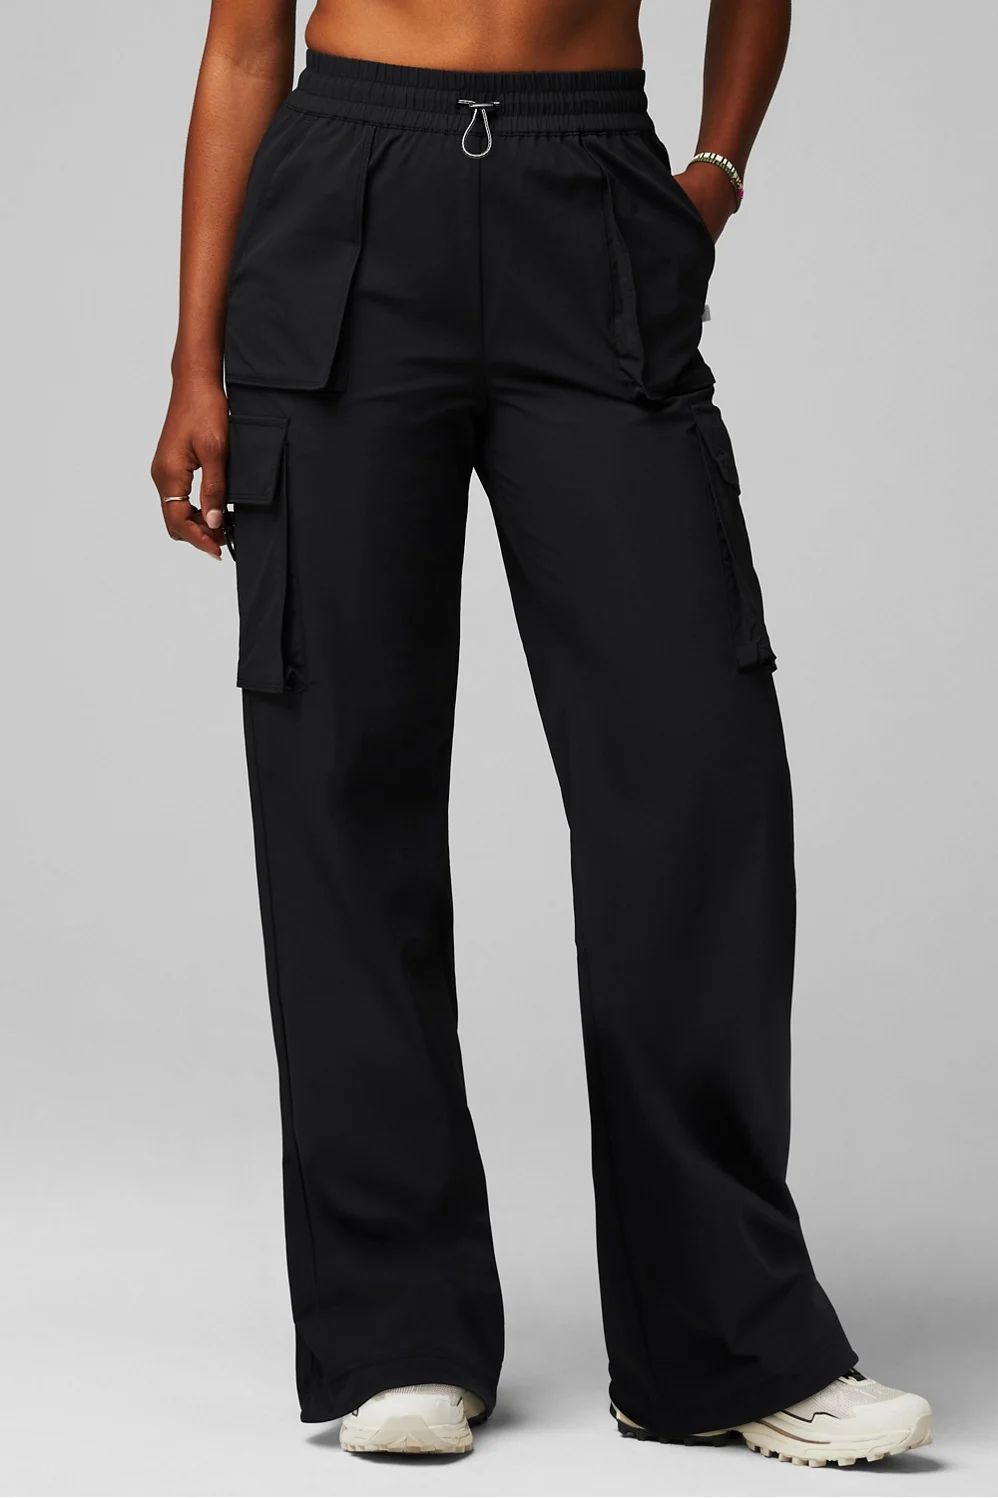 Heights Cargo Pant | Fabletics - North America